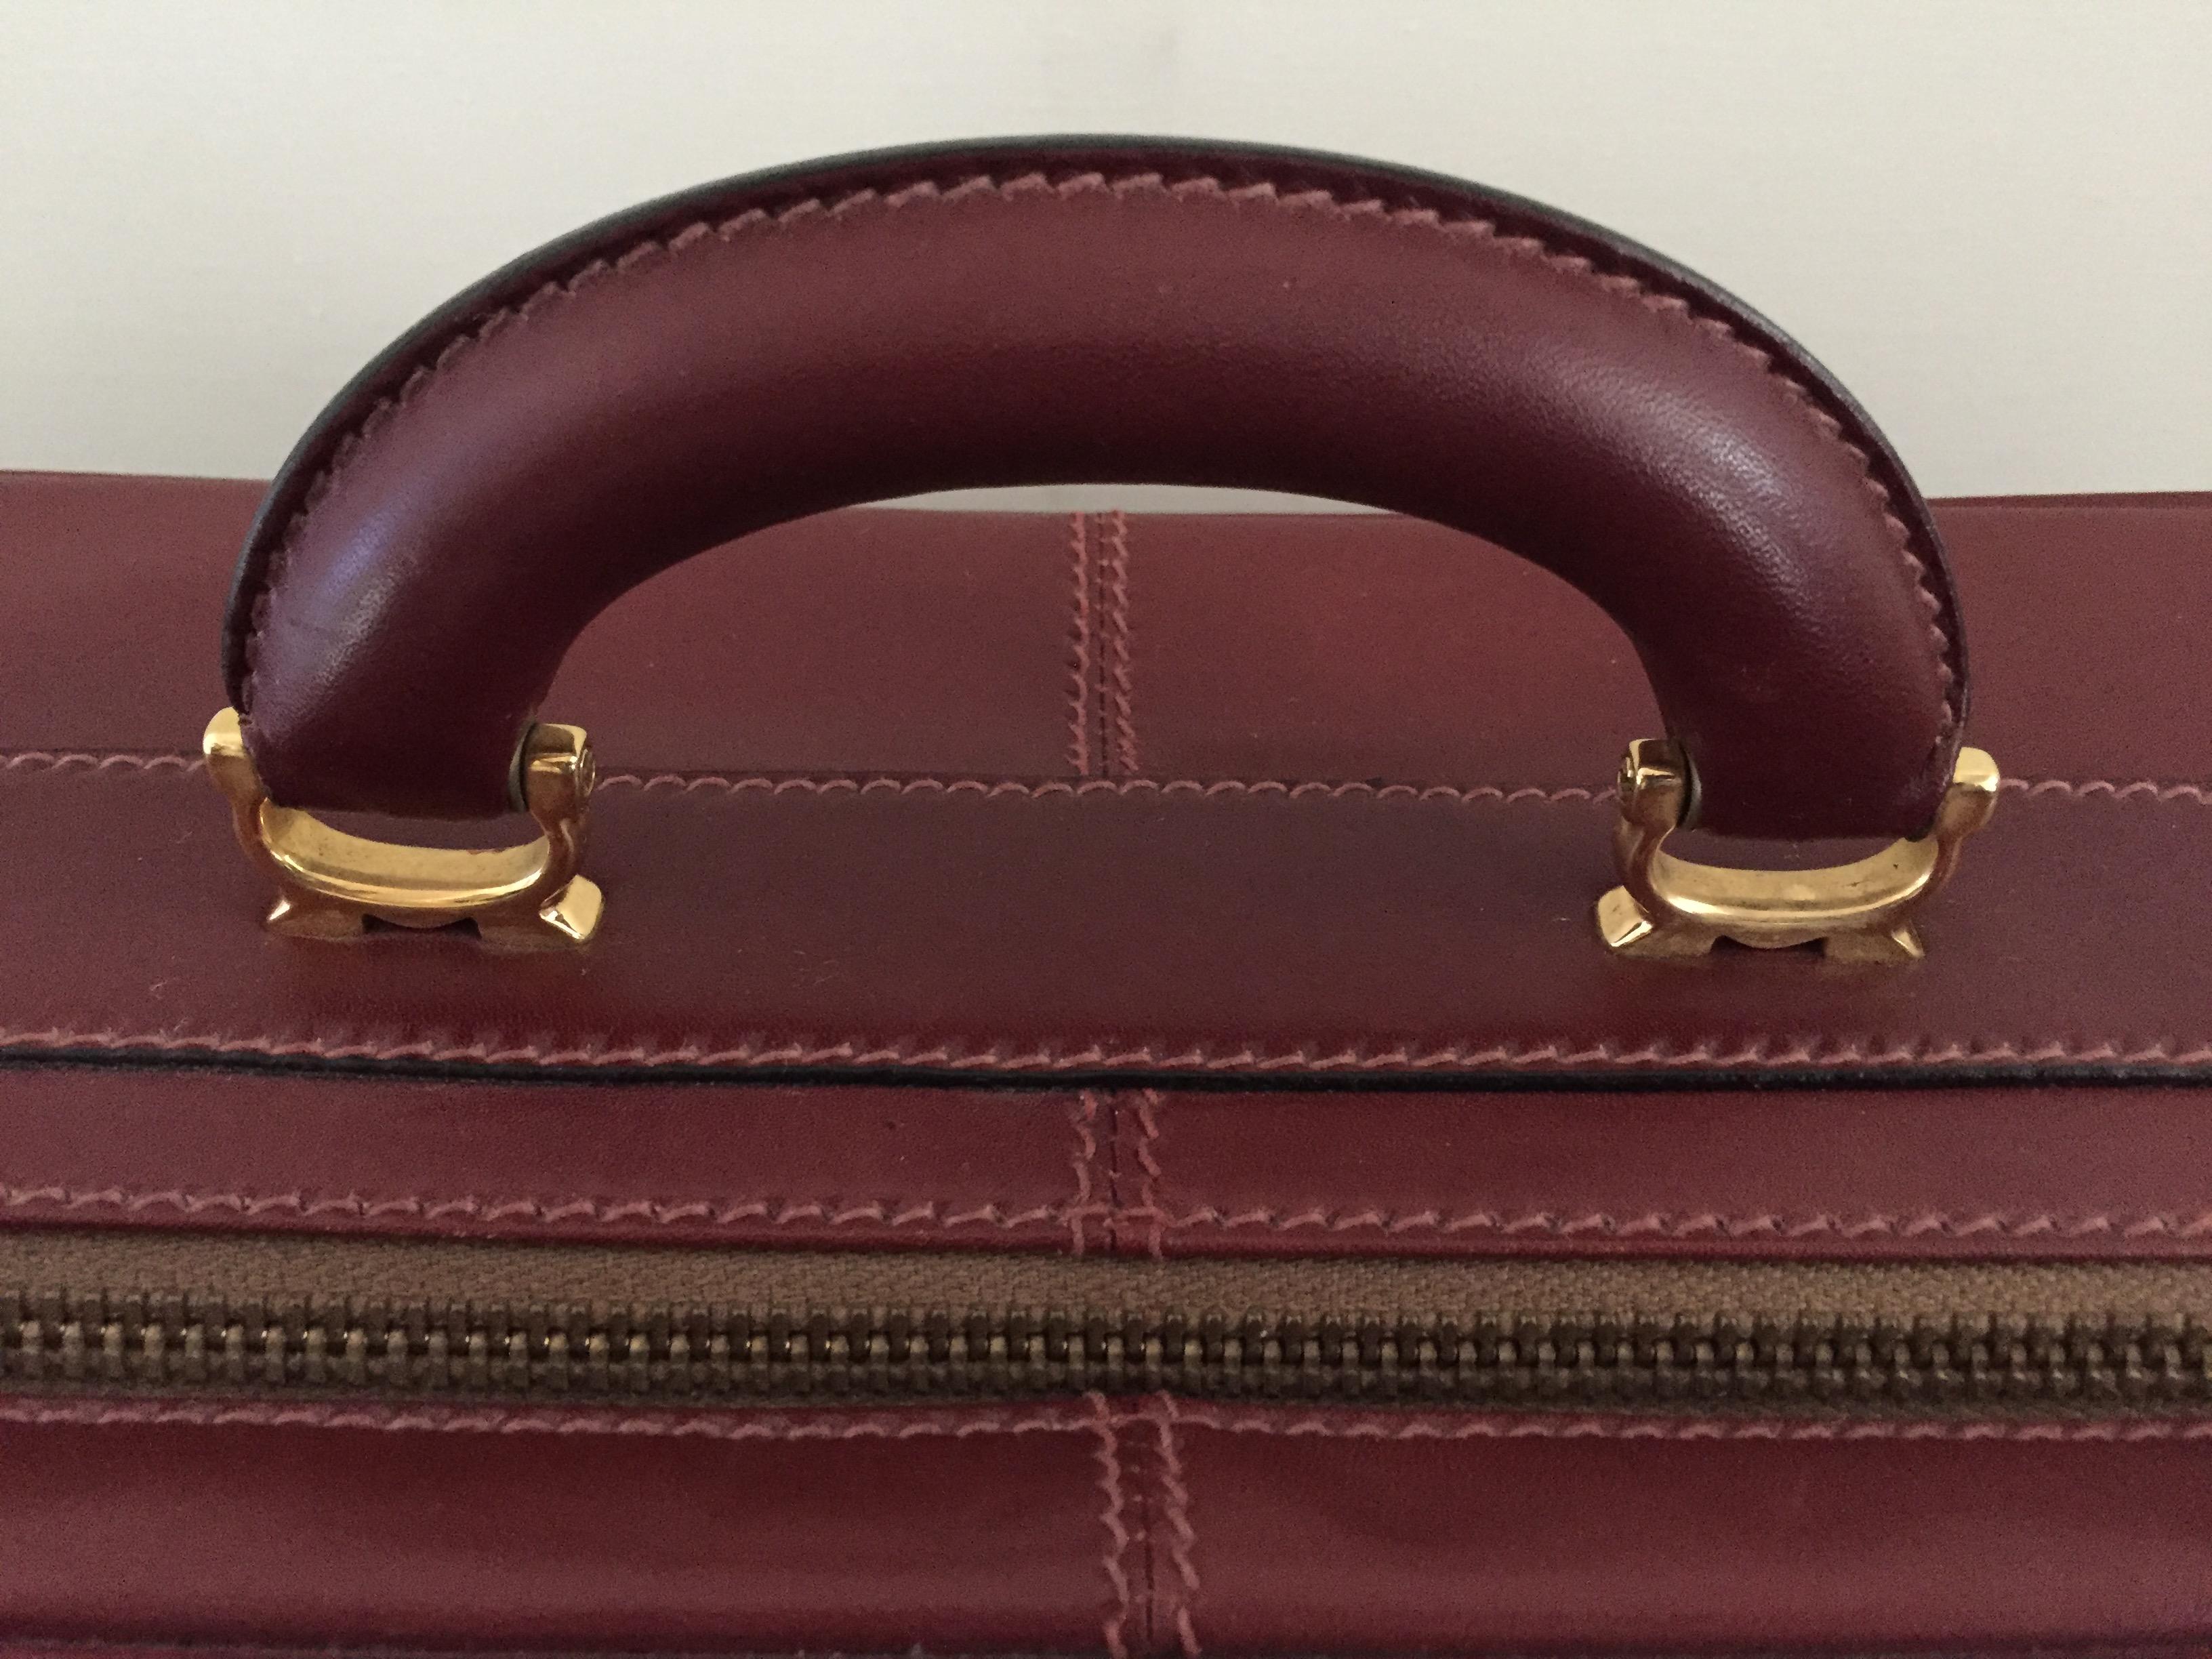 20th Century Cartier Les Must de Cartier Burgundy Leather Travel Overnight Suitcase / Luggage